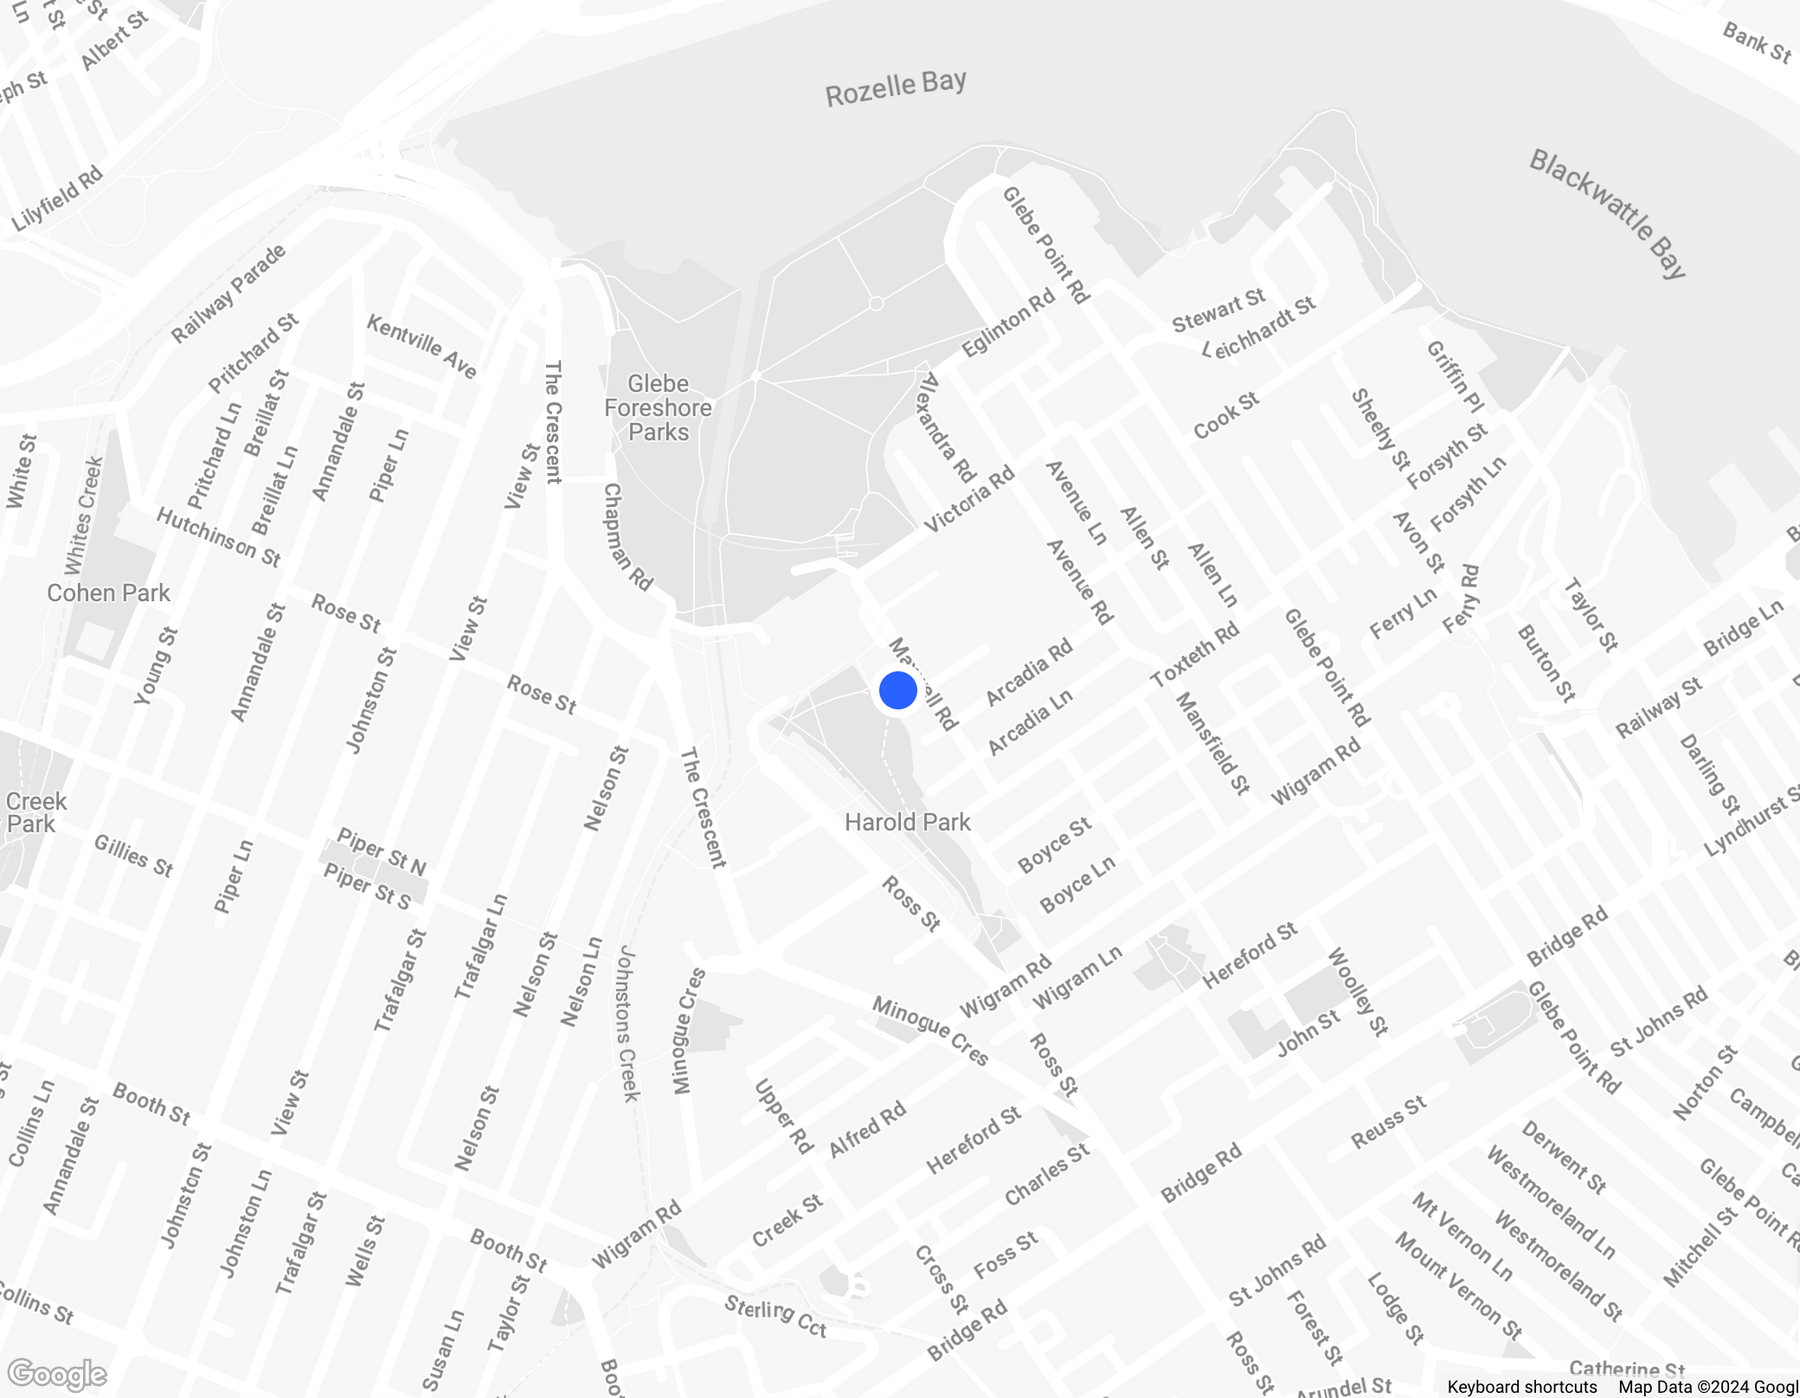 Map view showing the location of Harold Park in the Glebe area near Rozelle Bay, Sydney